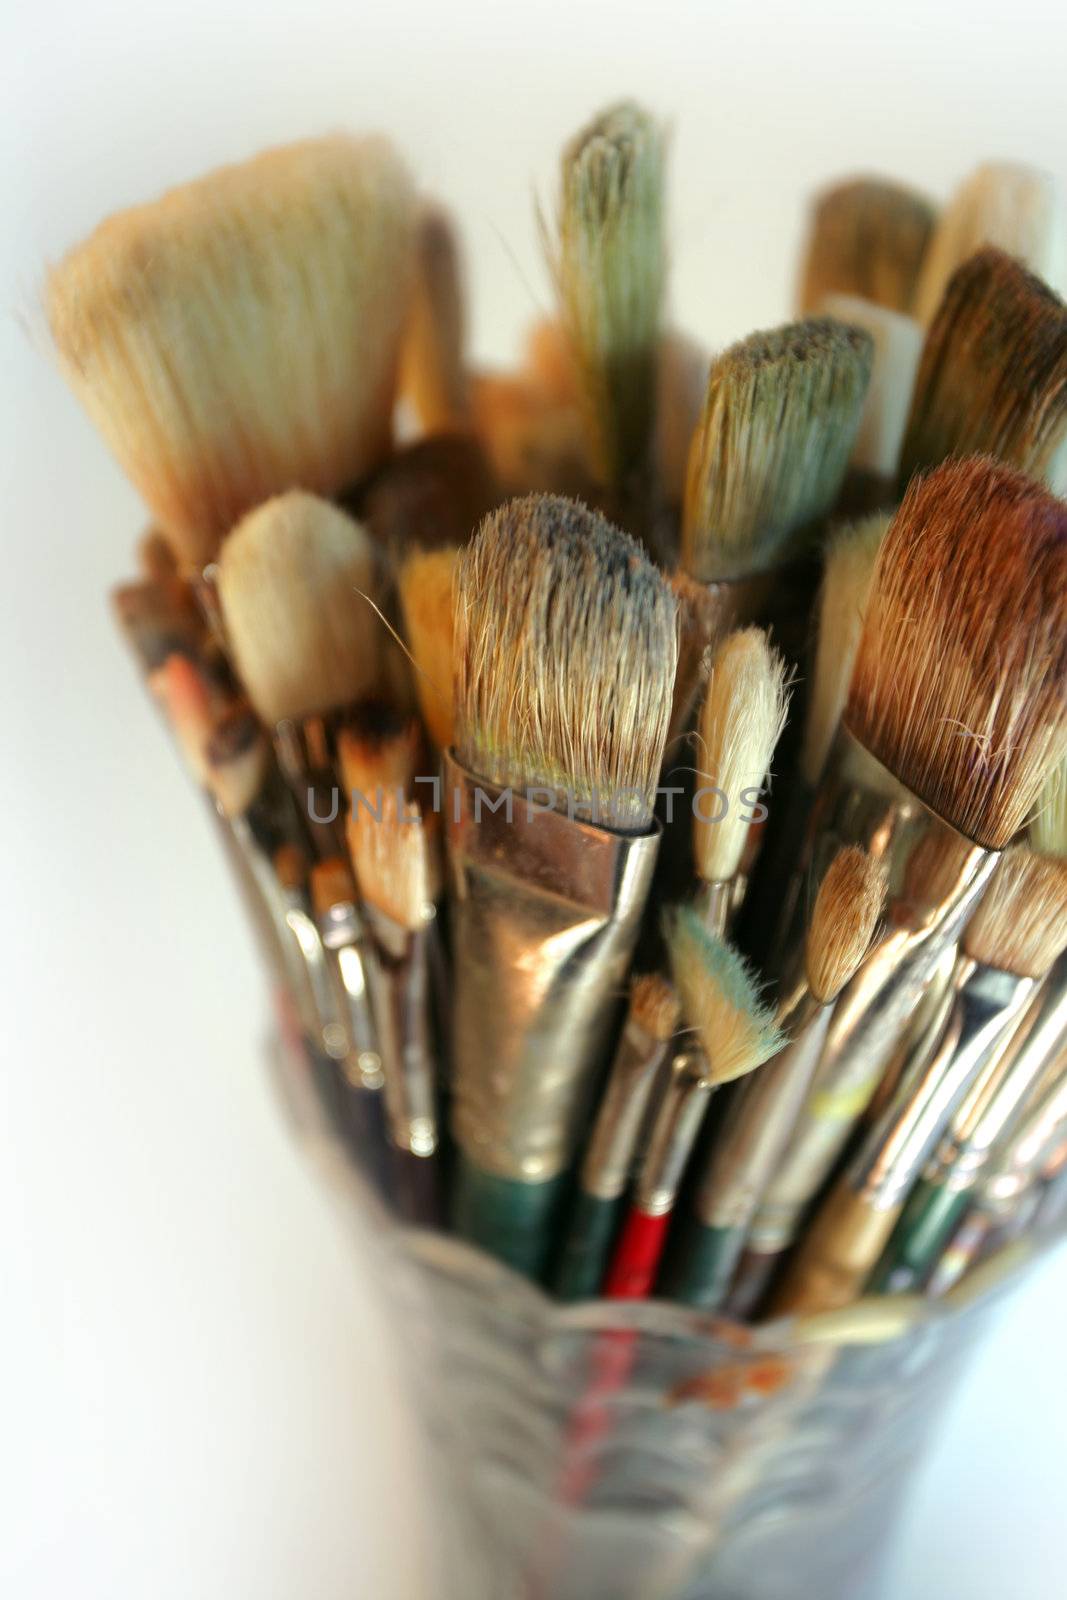 Vase of used brushes by sumners